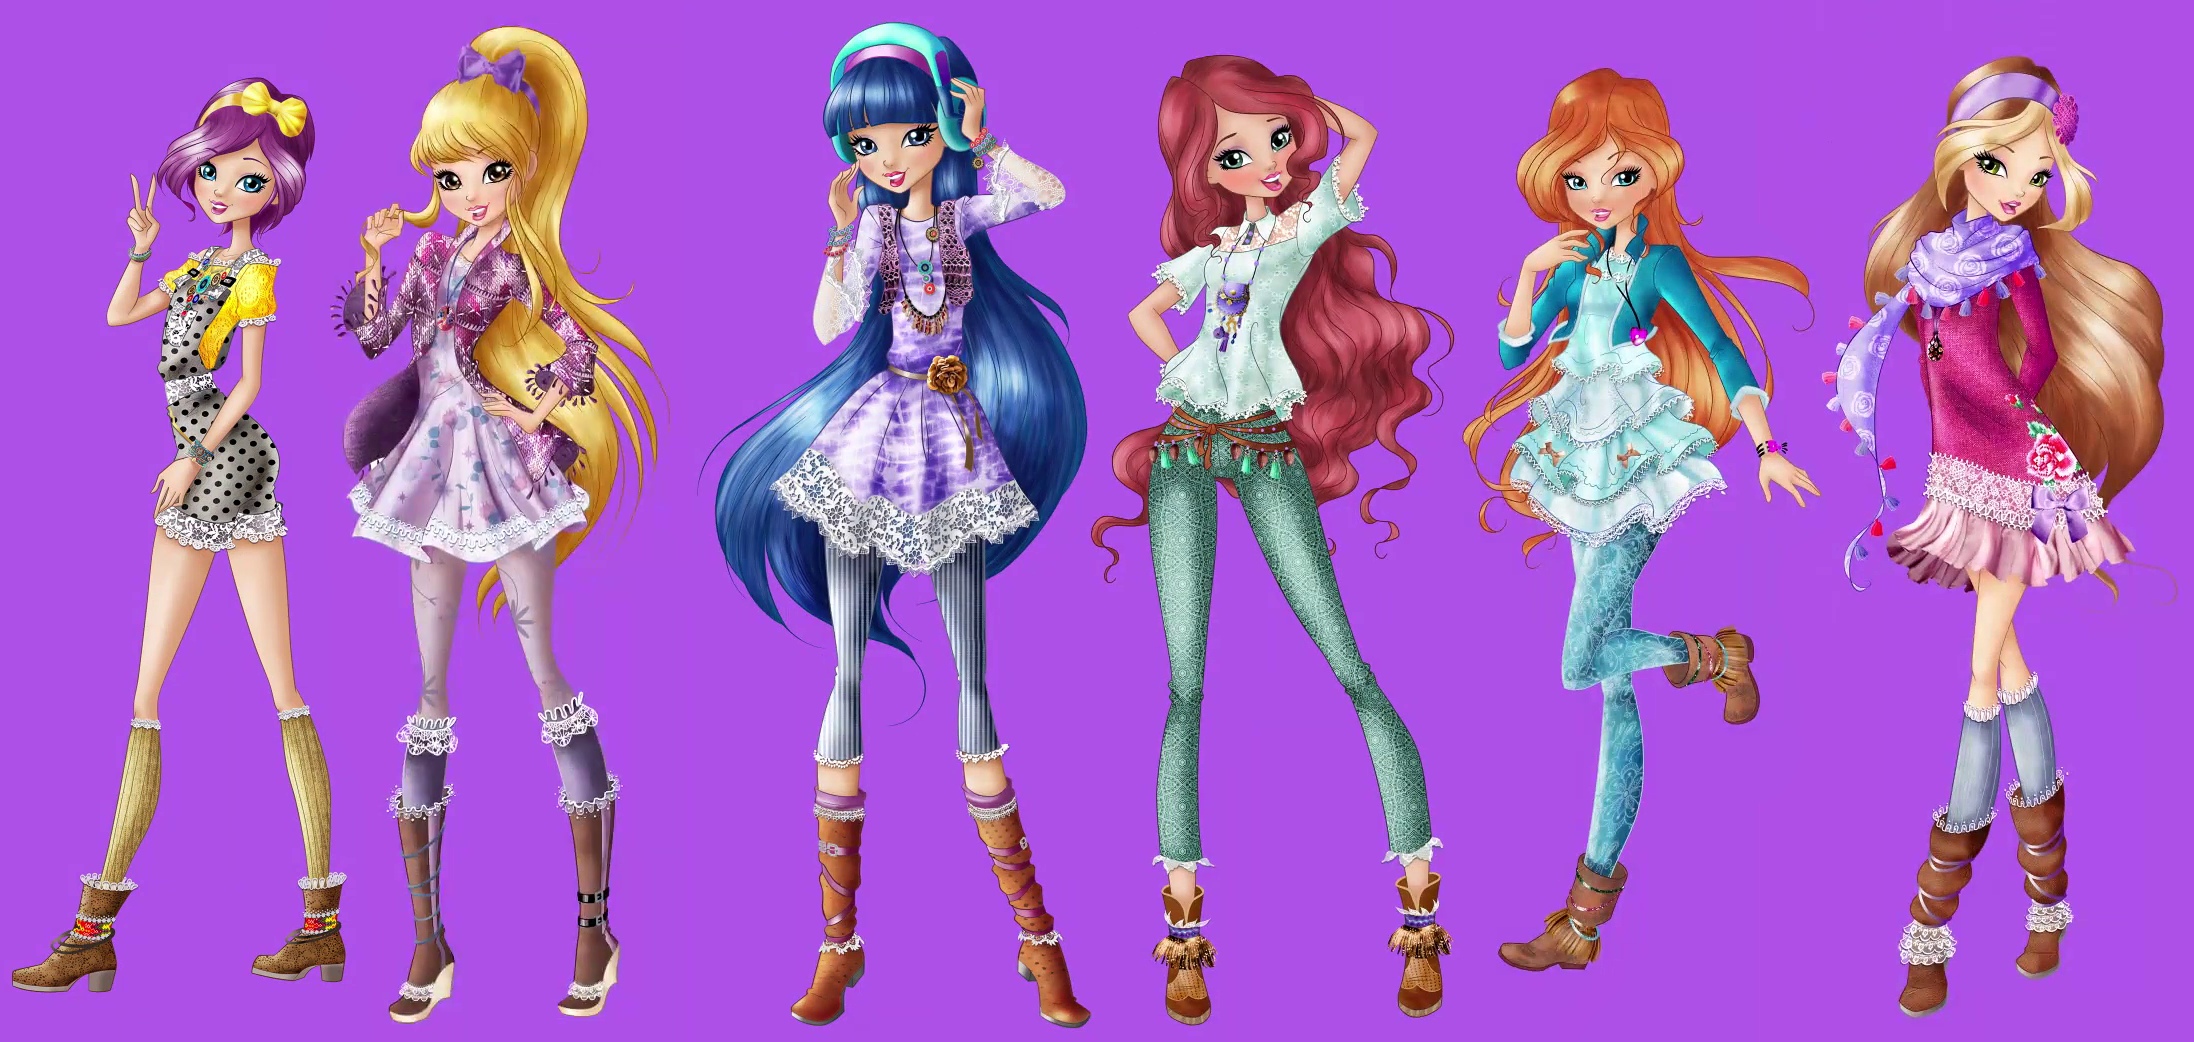 The Full Body Official Art Of All Winx Girls From Winx Club Season